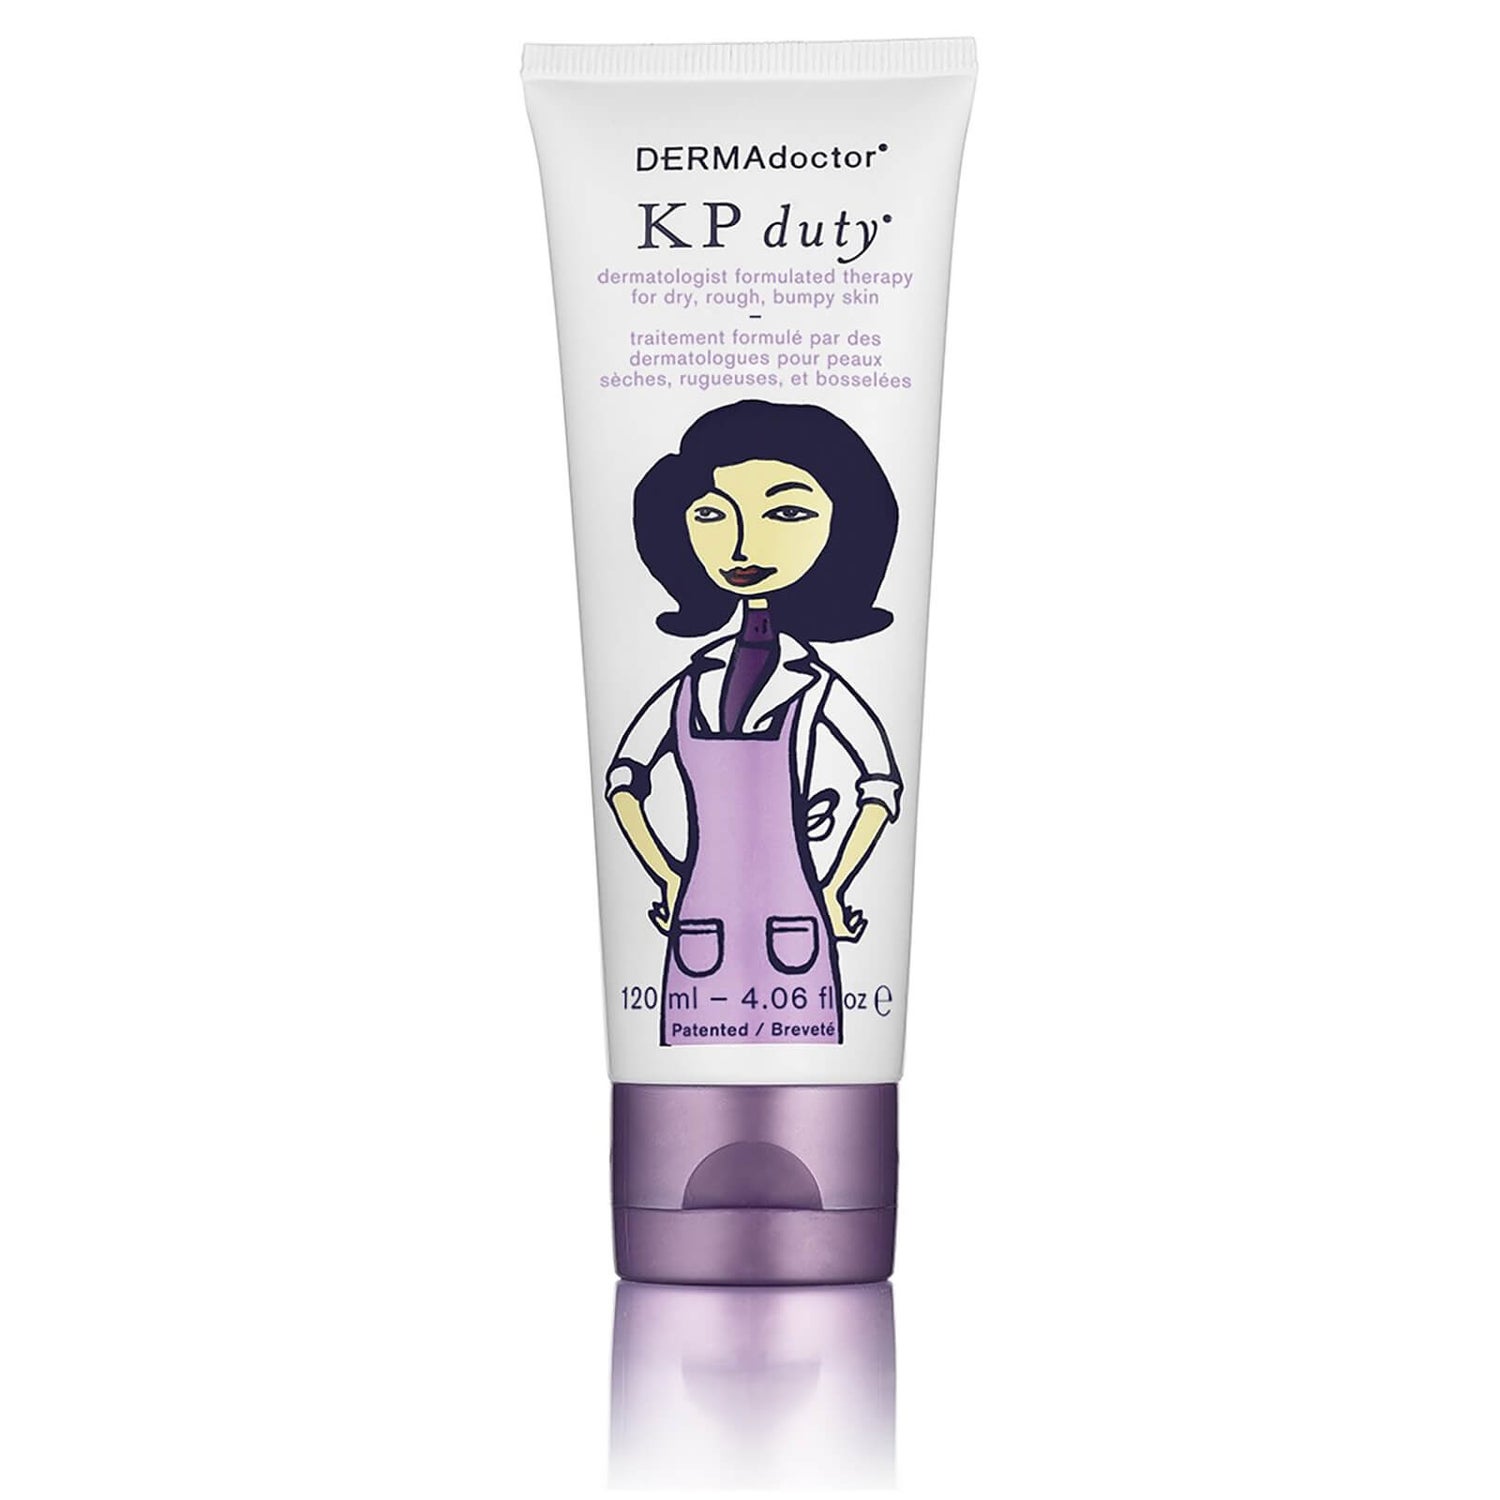 DERMAdoctor KP Duty AHA Moisturizing Therapy for Dry Skin